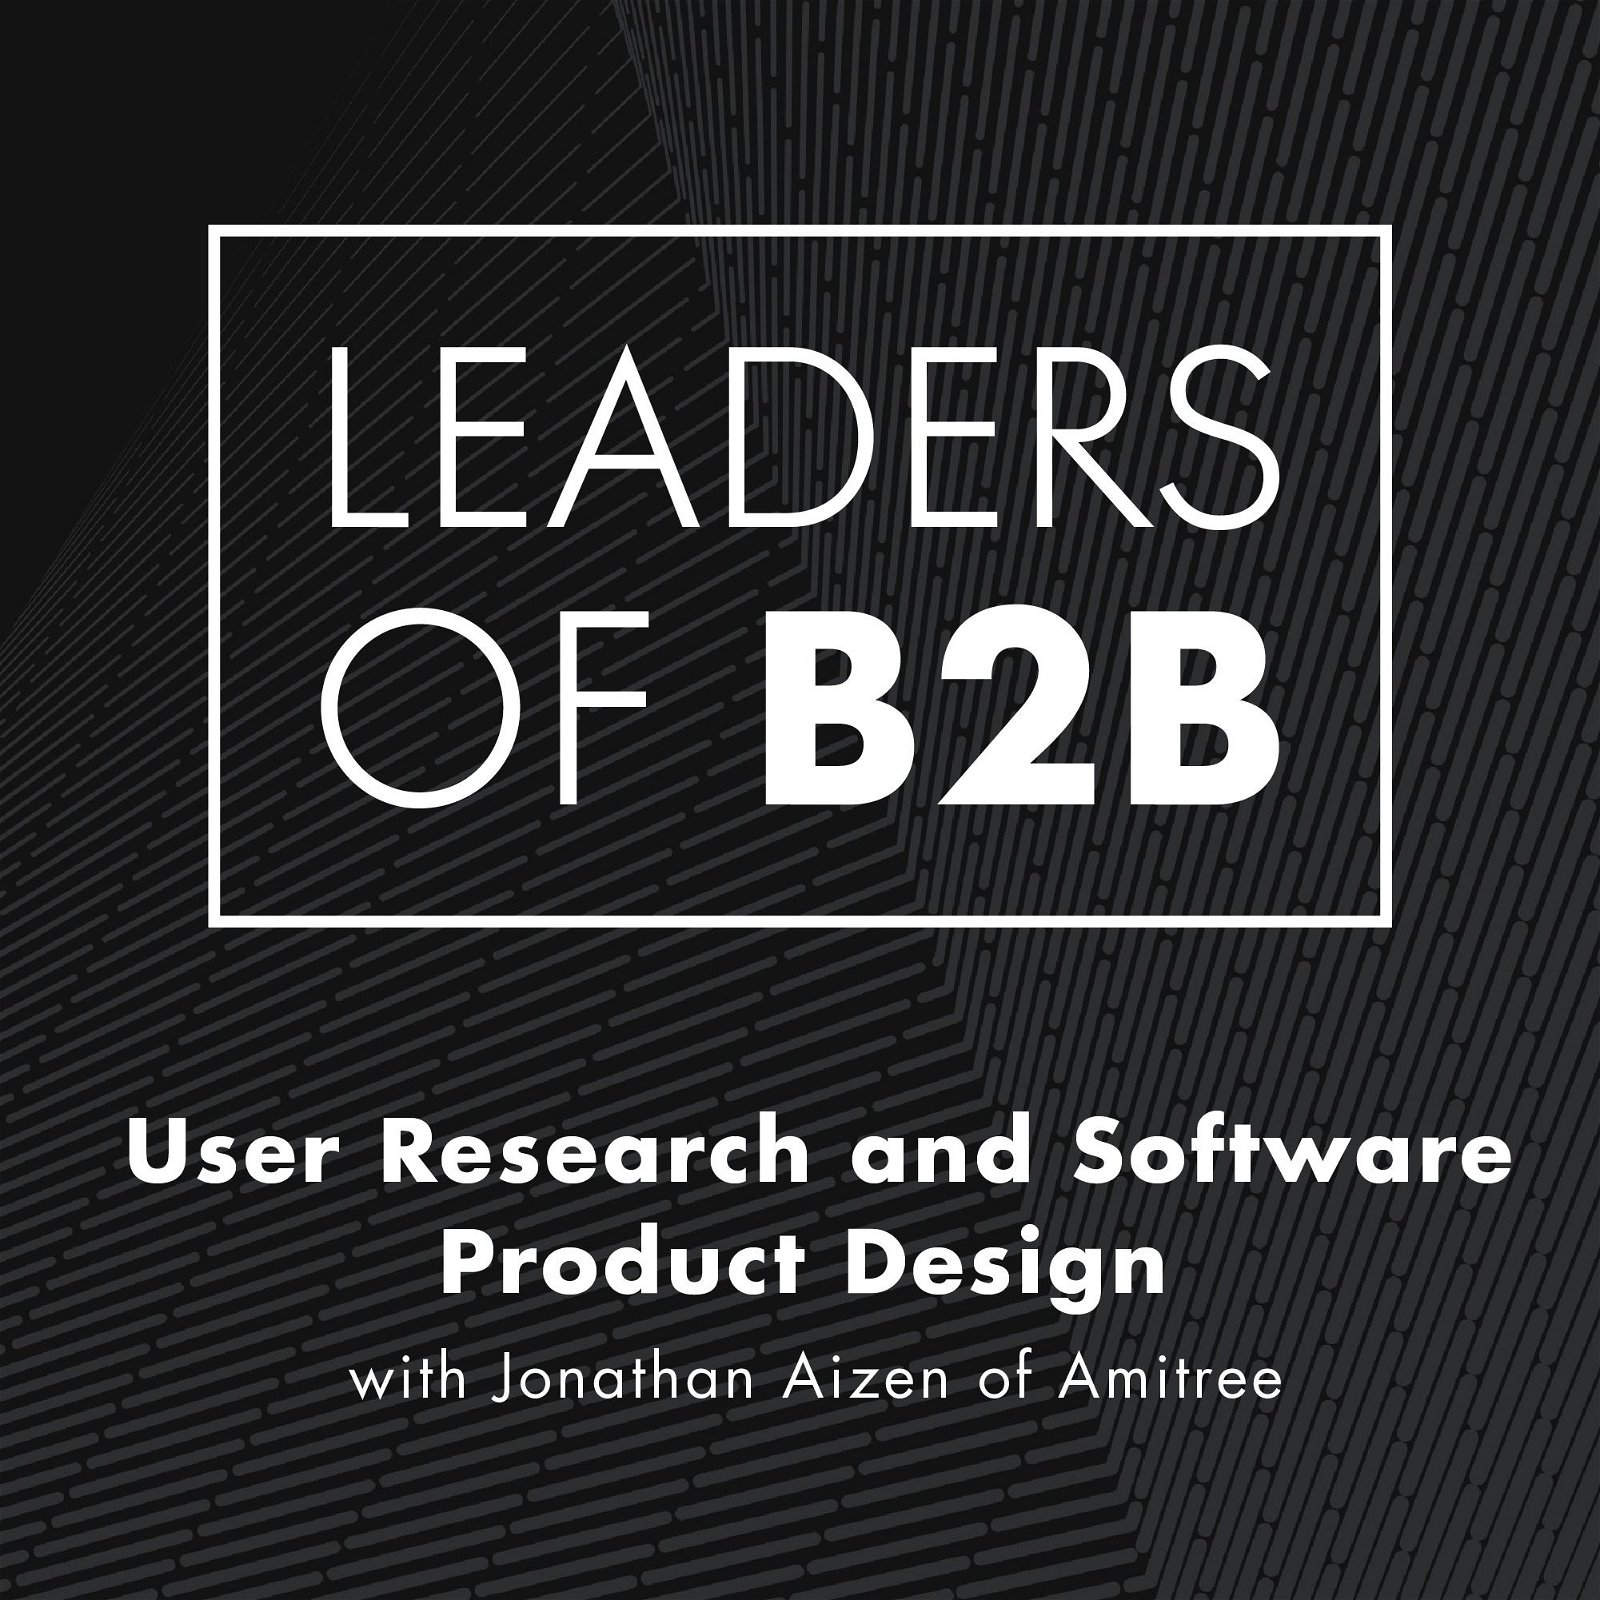 User Research and Software Product Design with Jonathan Aizen of Amitree